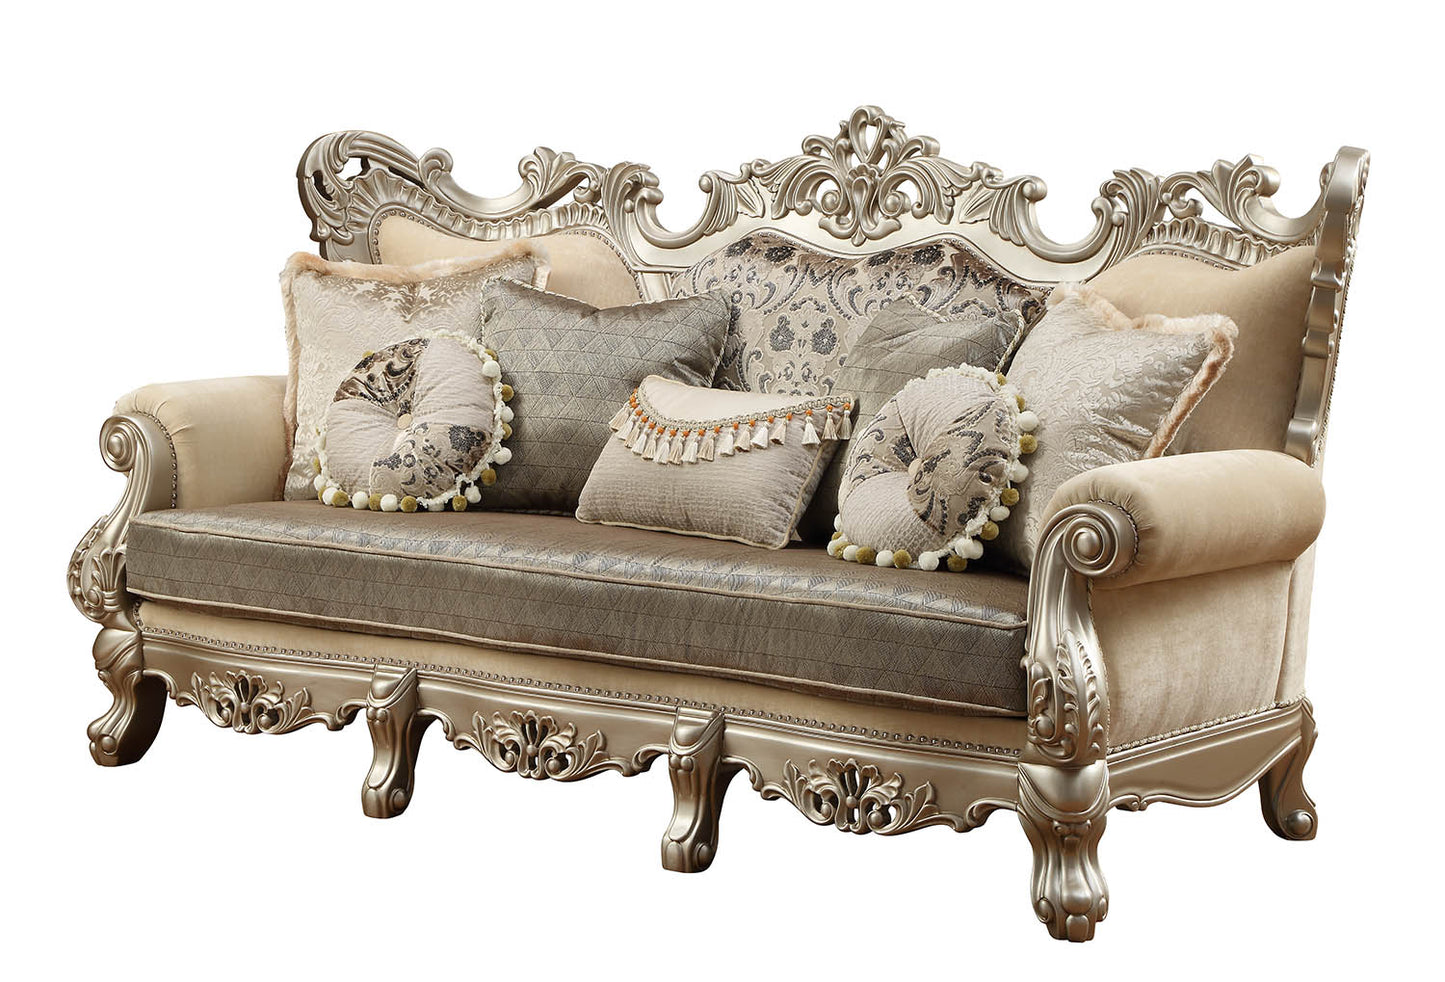 41" Champagne Cotton Blend Curved Floral Sofa And Toss Pillows